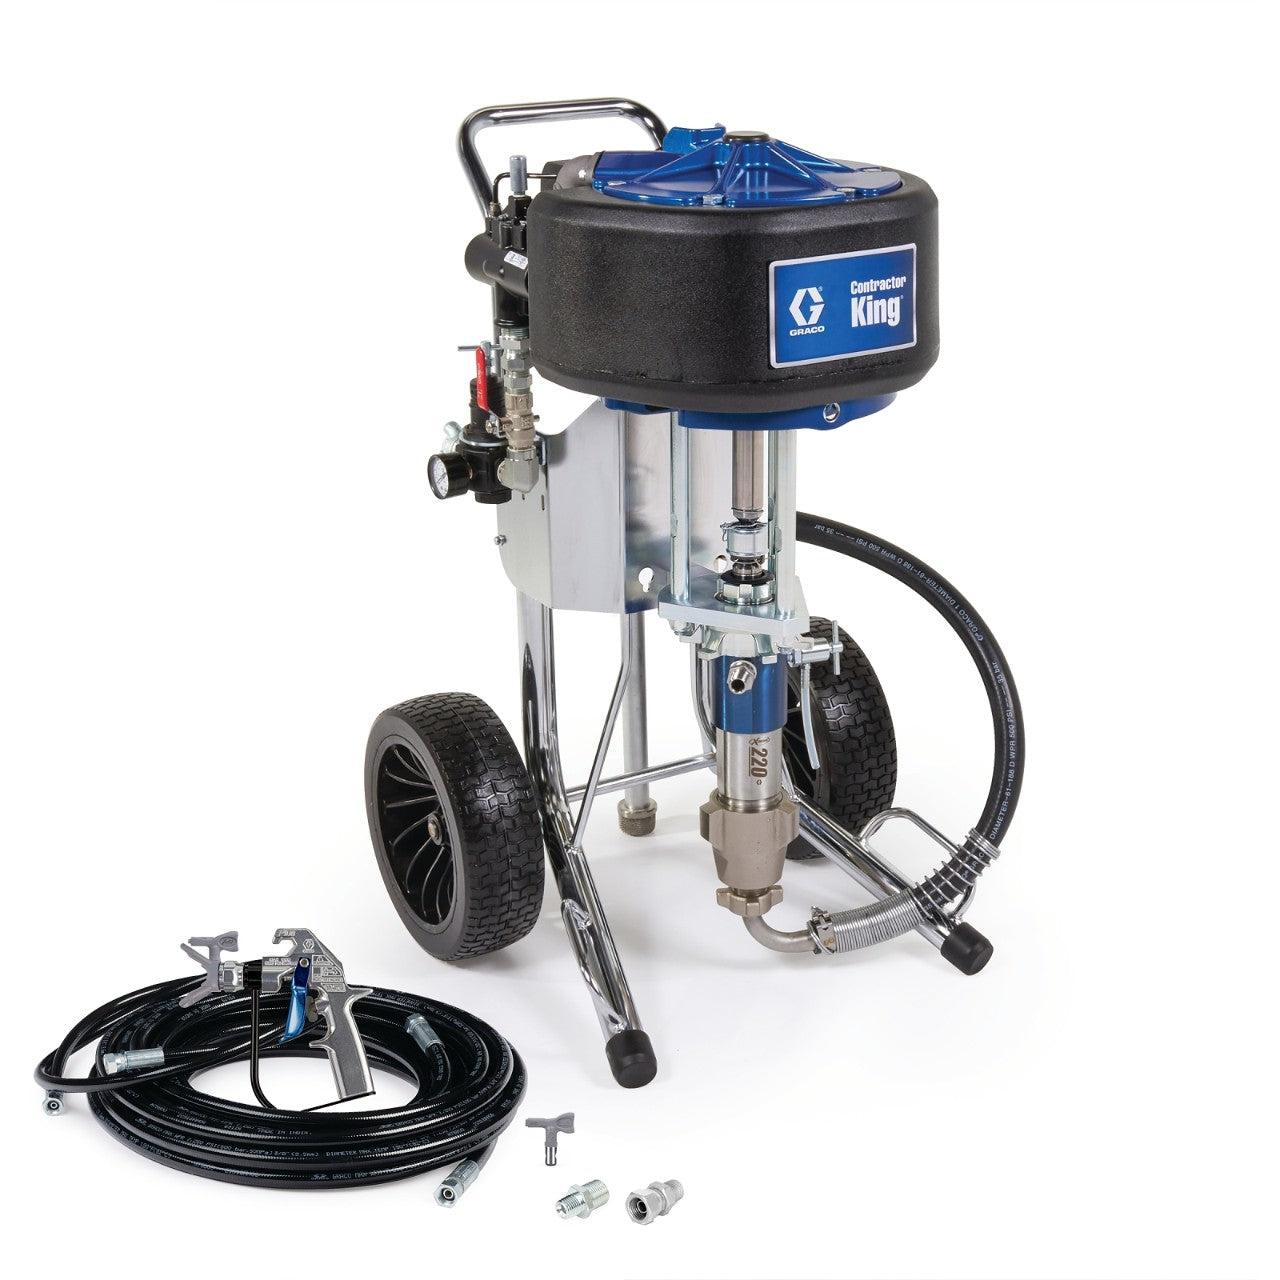 Contractor King 60:1 Air Powered Airless Sprayer, Complete (2-F Gun)